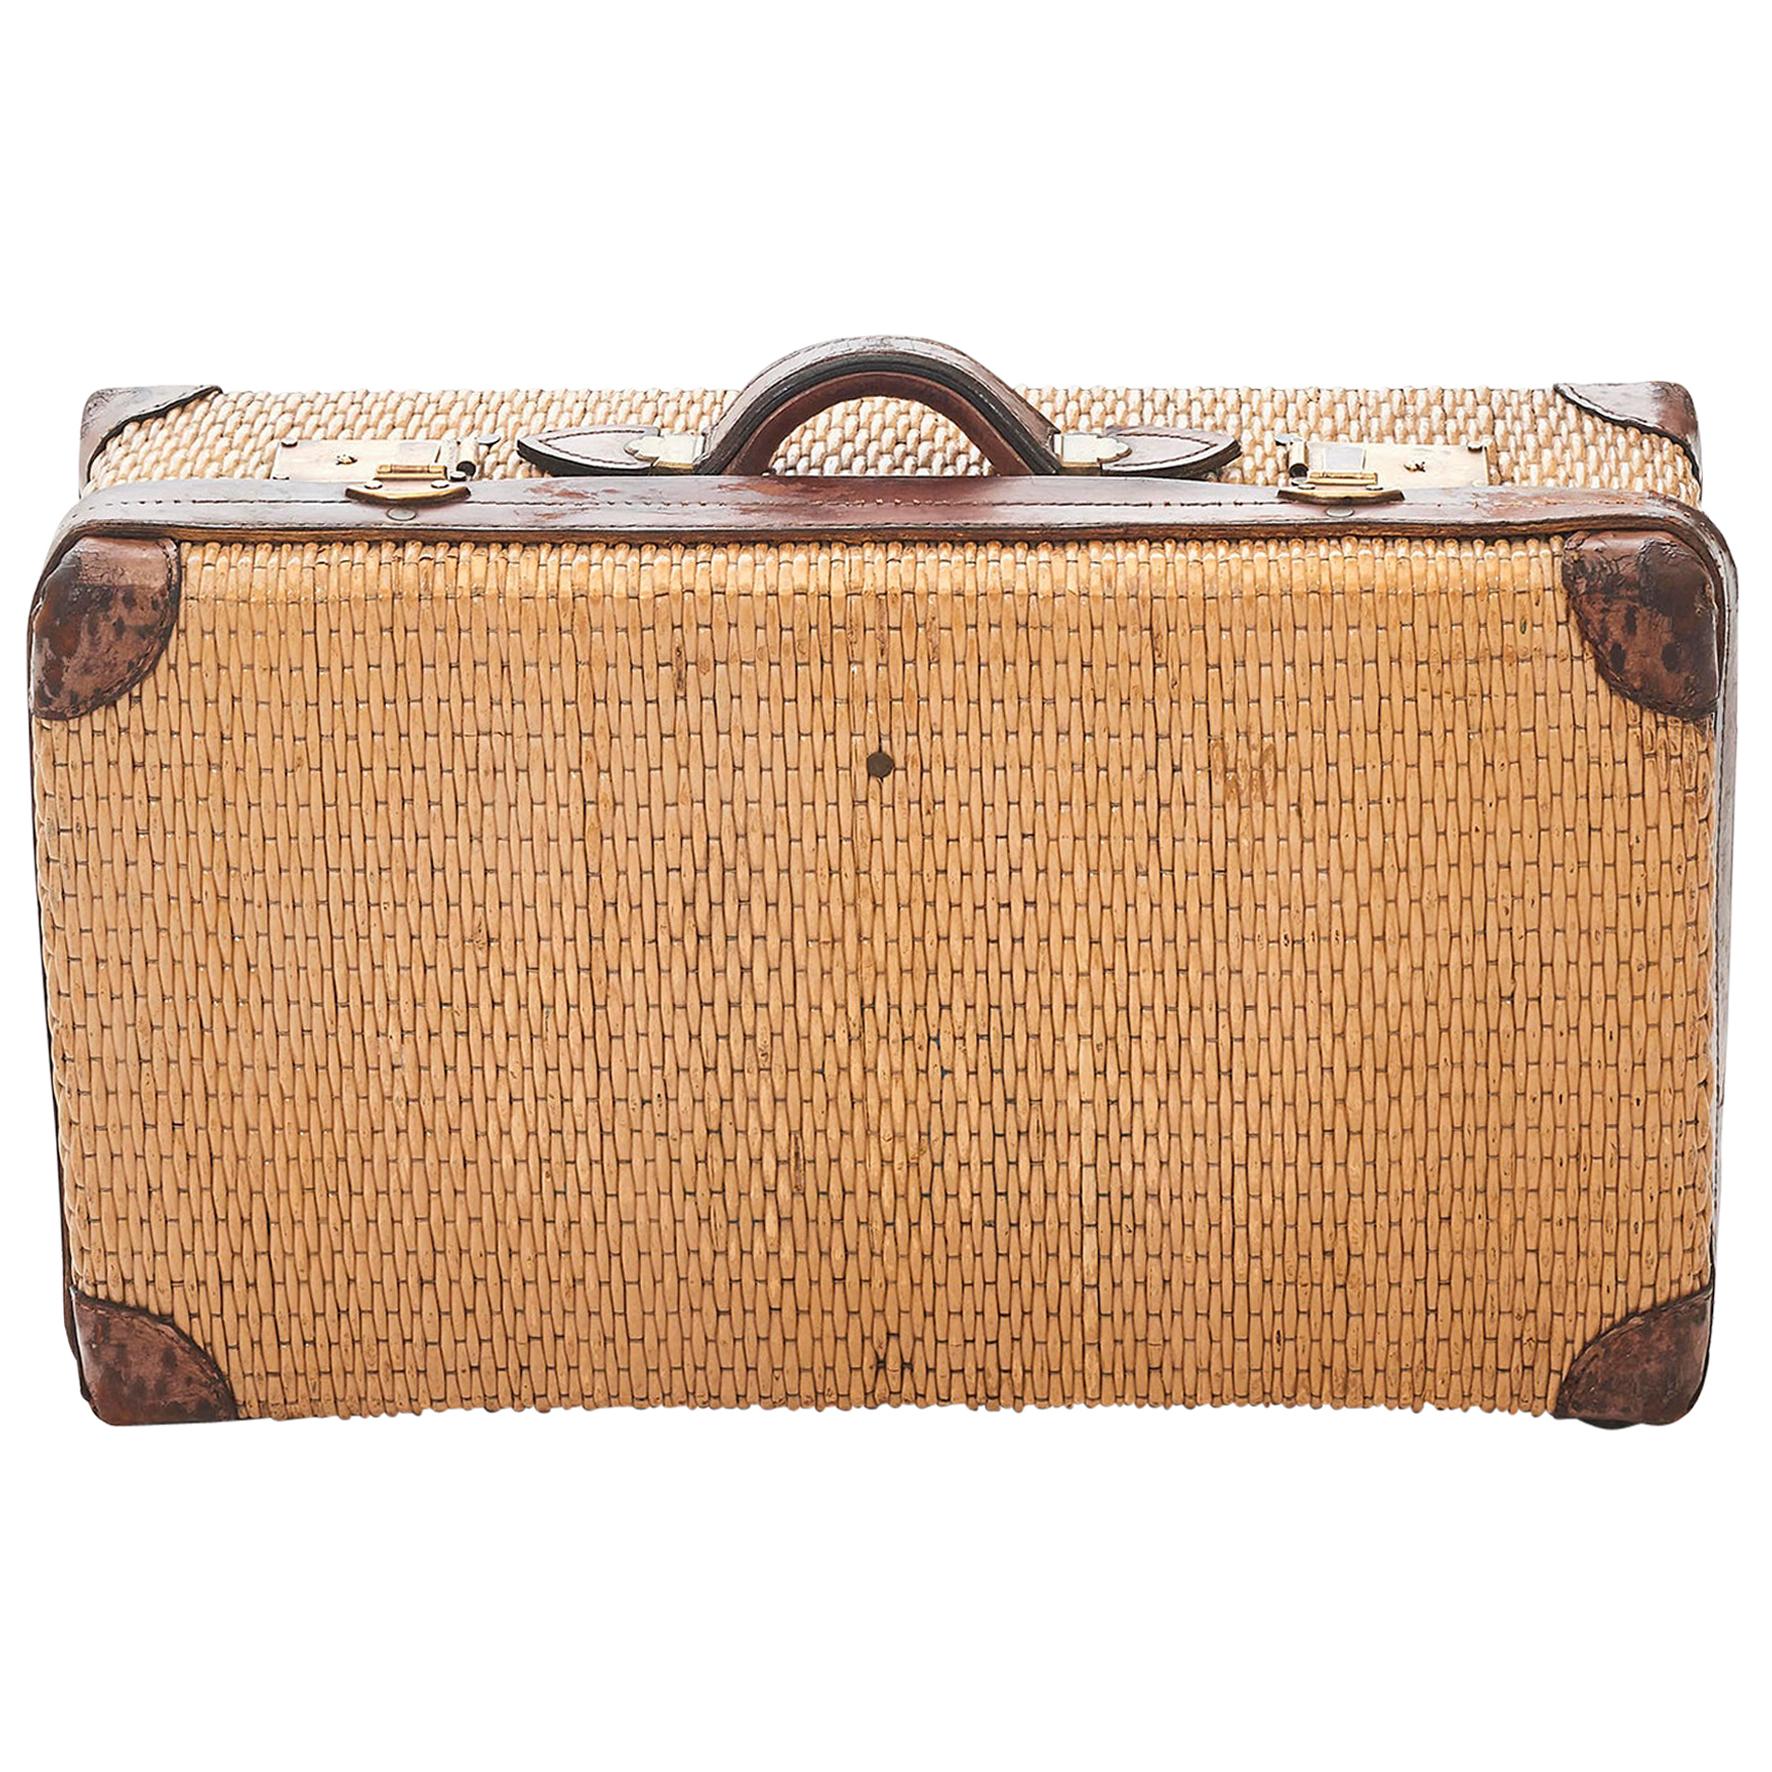 Very Charming Travel Suitcase in Woven Cane